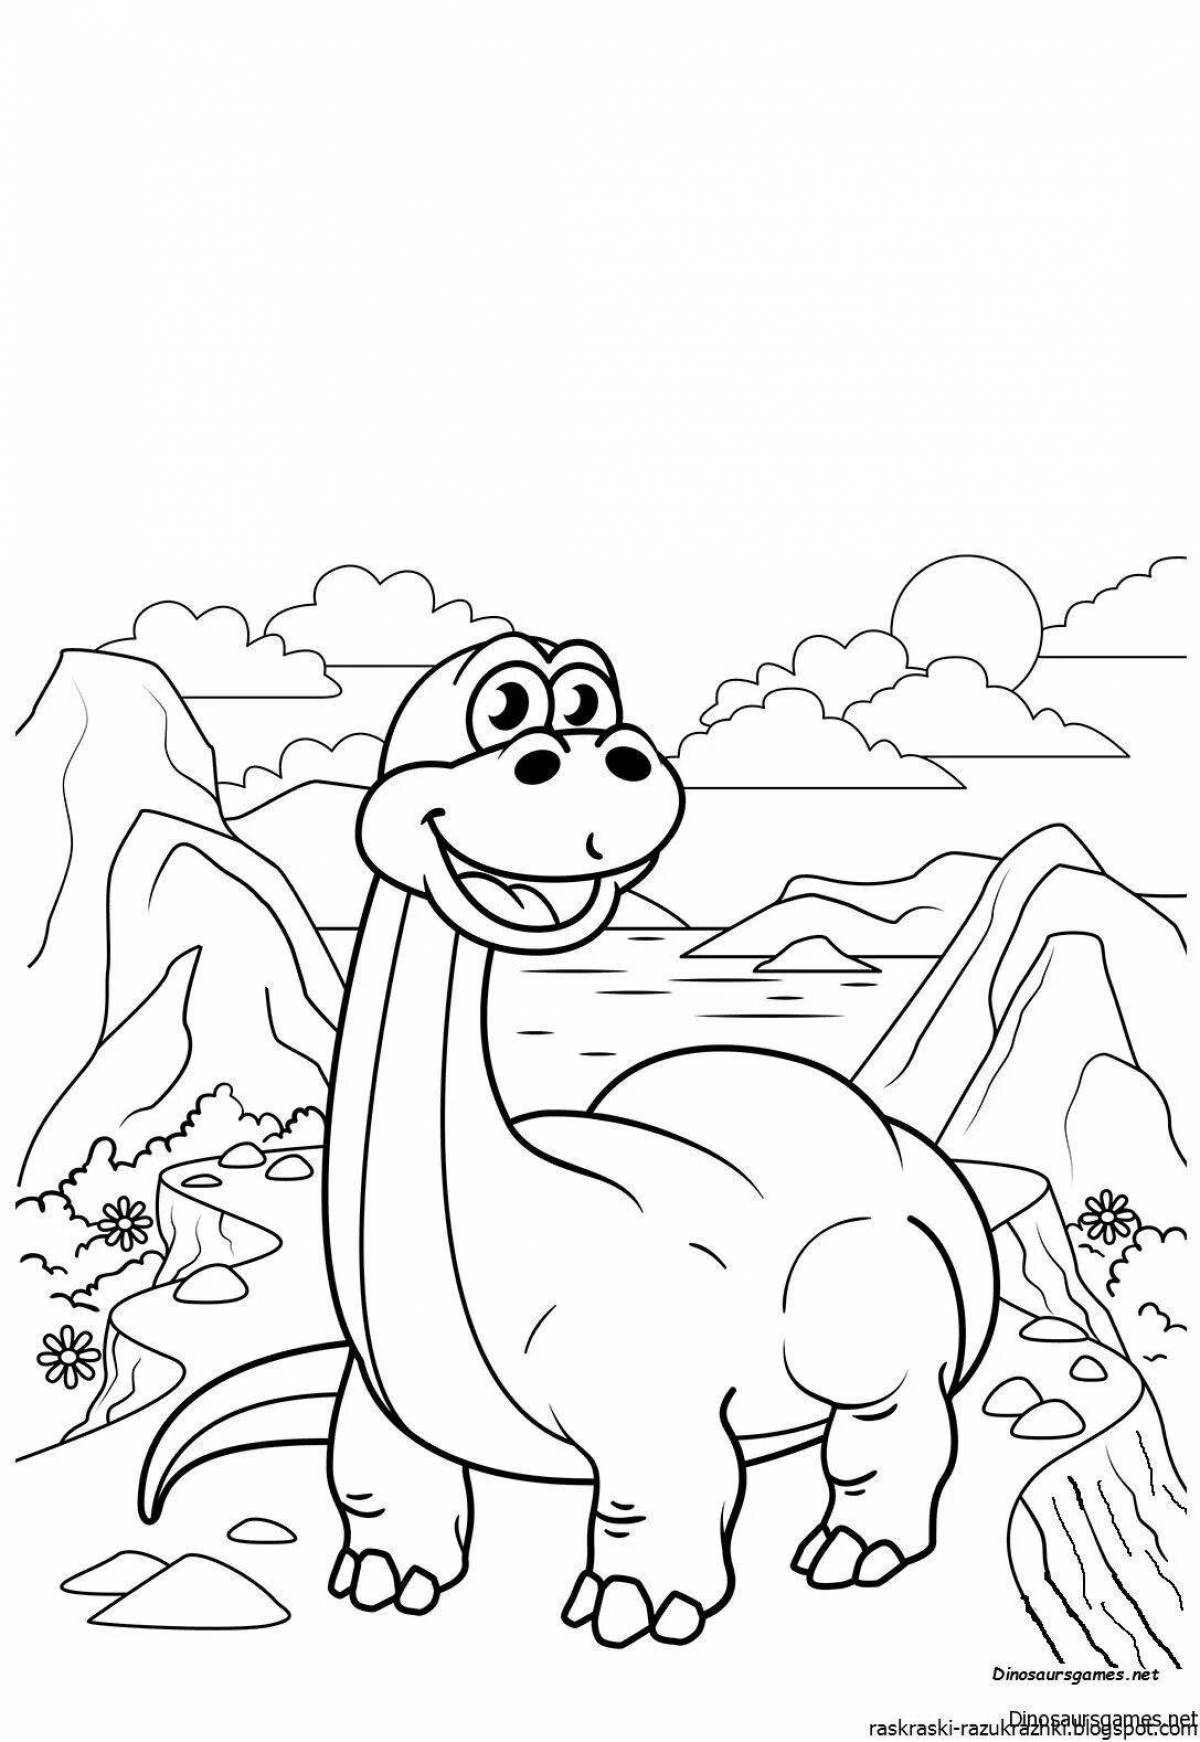 Wonderful dinosaurs coloring for children 4-5 years old